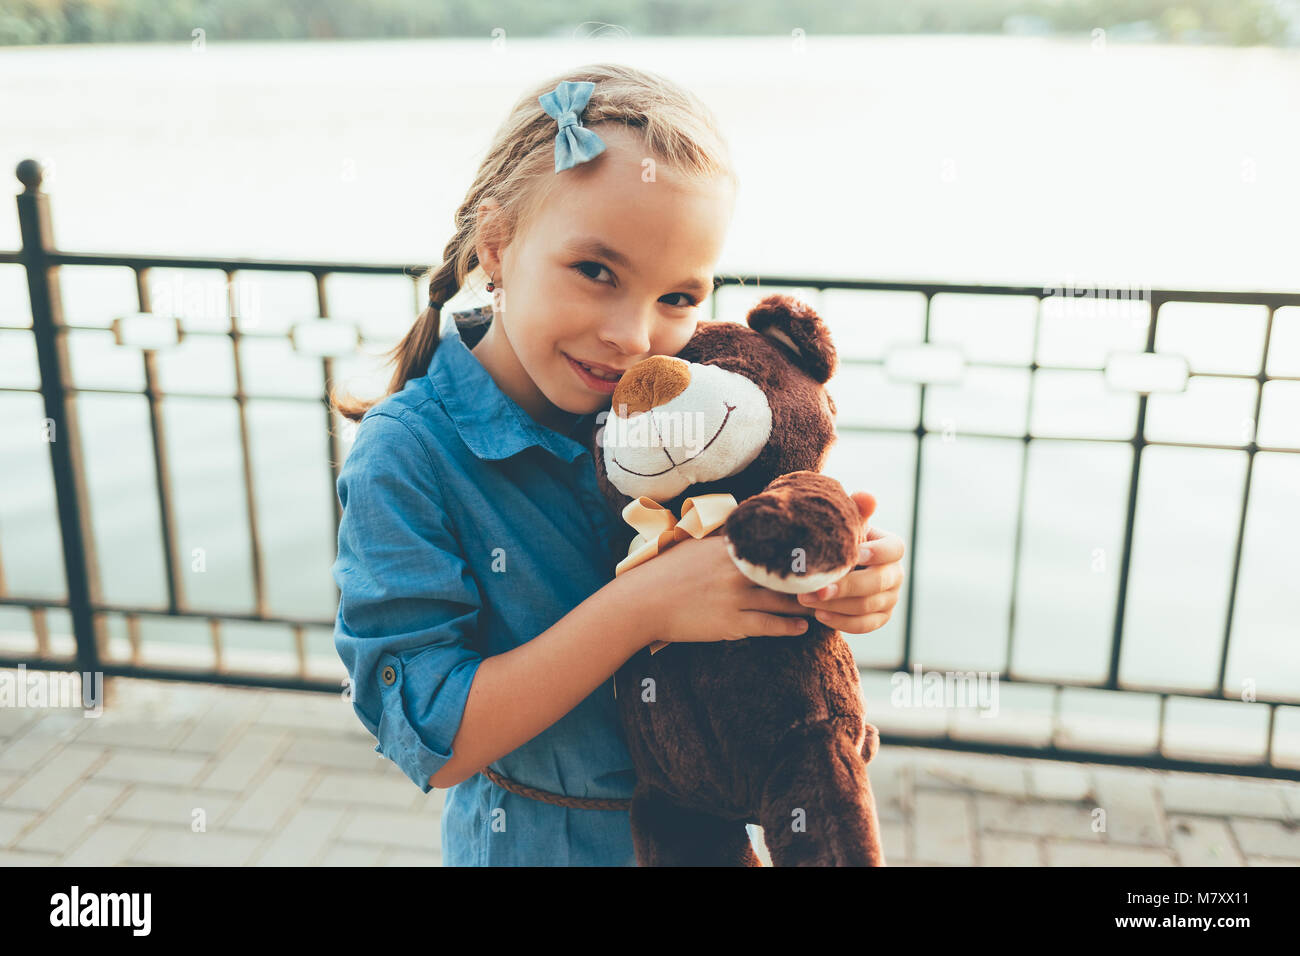 Close-up portrait of girl embracing a cute teddy bear looking to camera on a lake with trees background wearing denim dress. Kids friendship concept.  Stock Photo